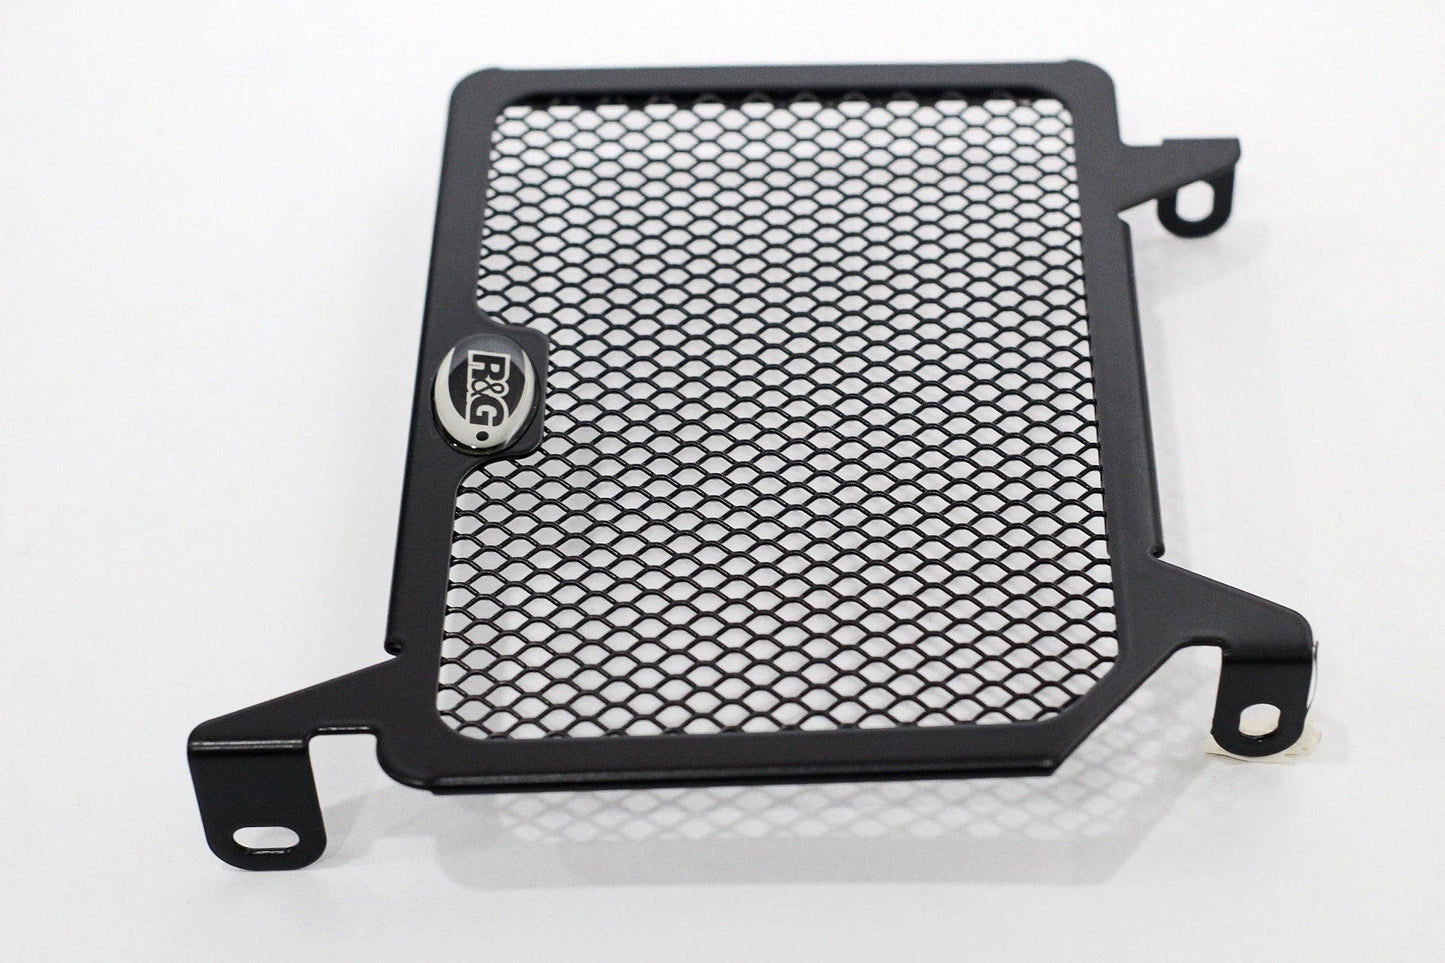 R&G Radiator Guards fits for Yamaha MT-125 ('14-) - Durian Bikers